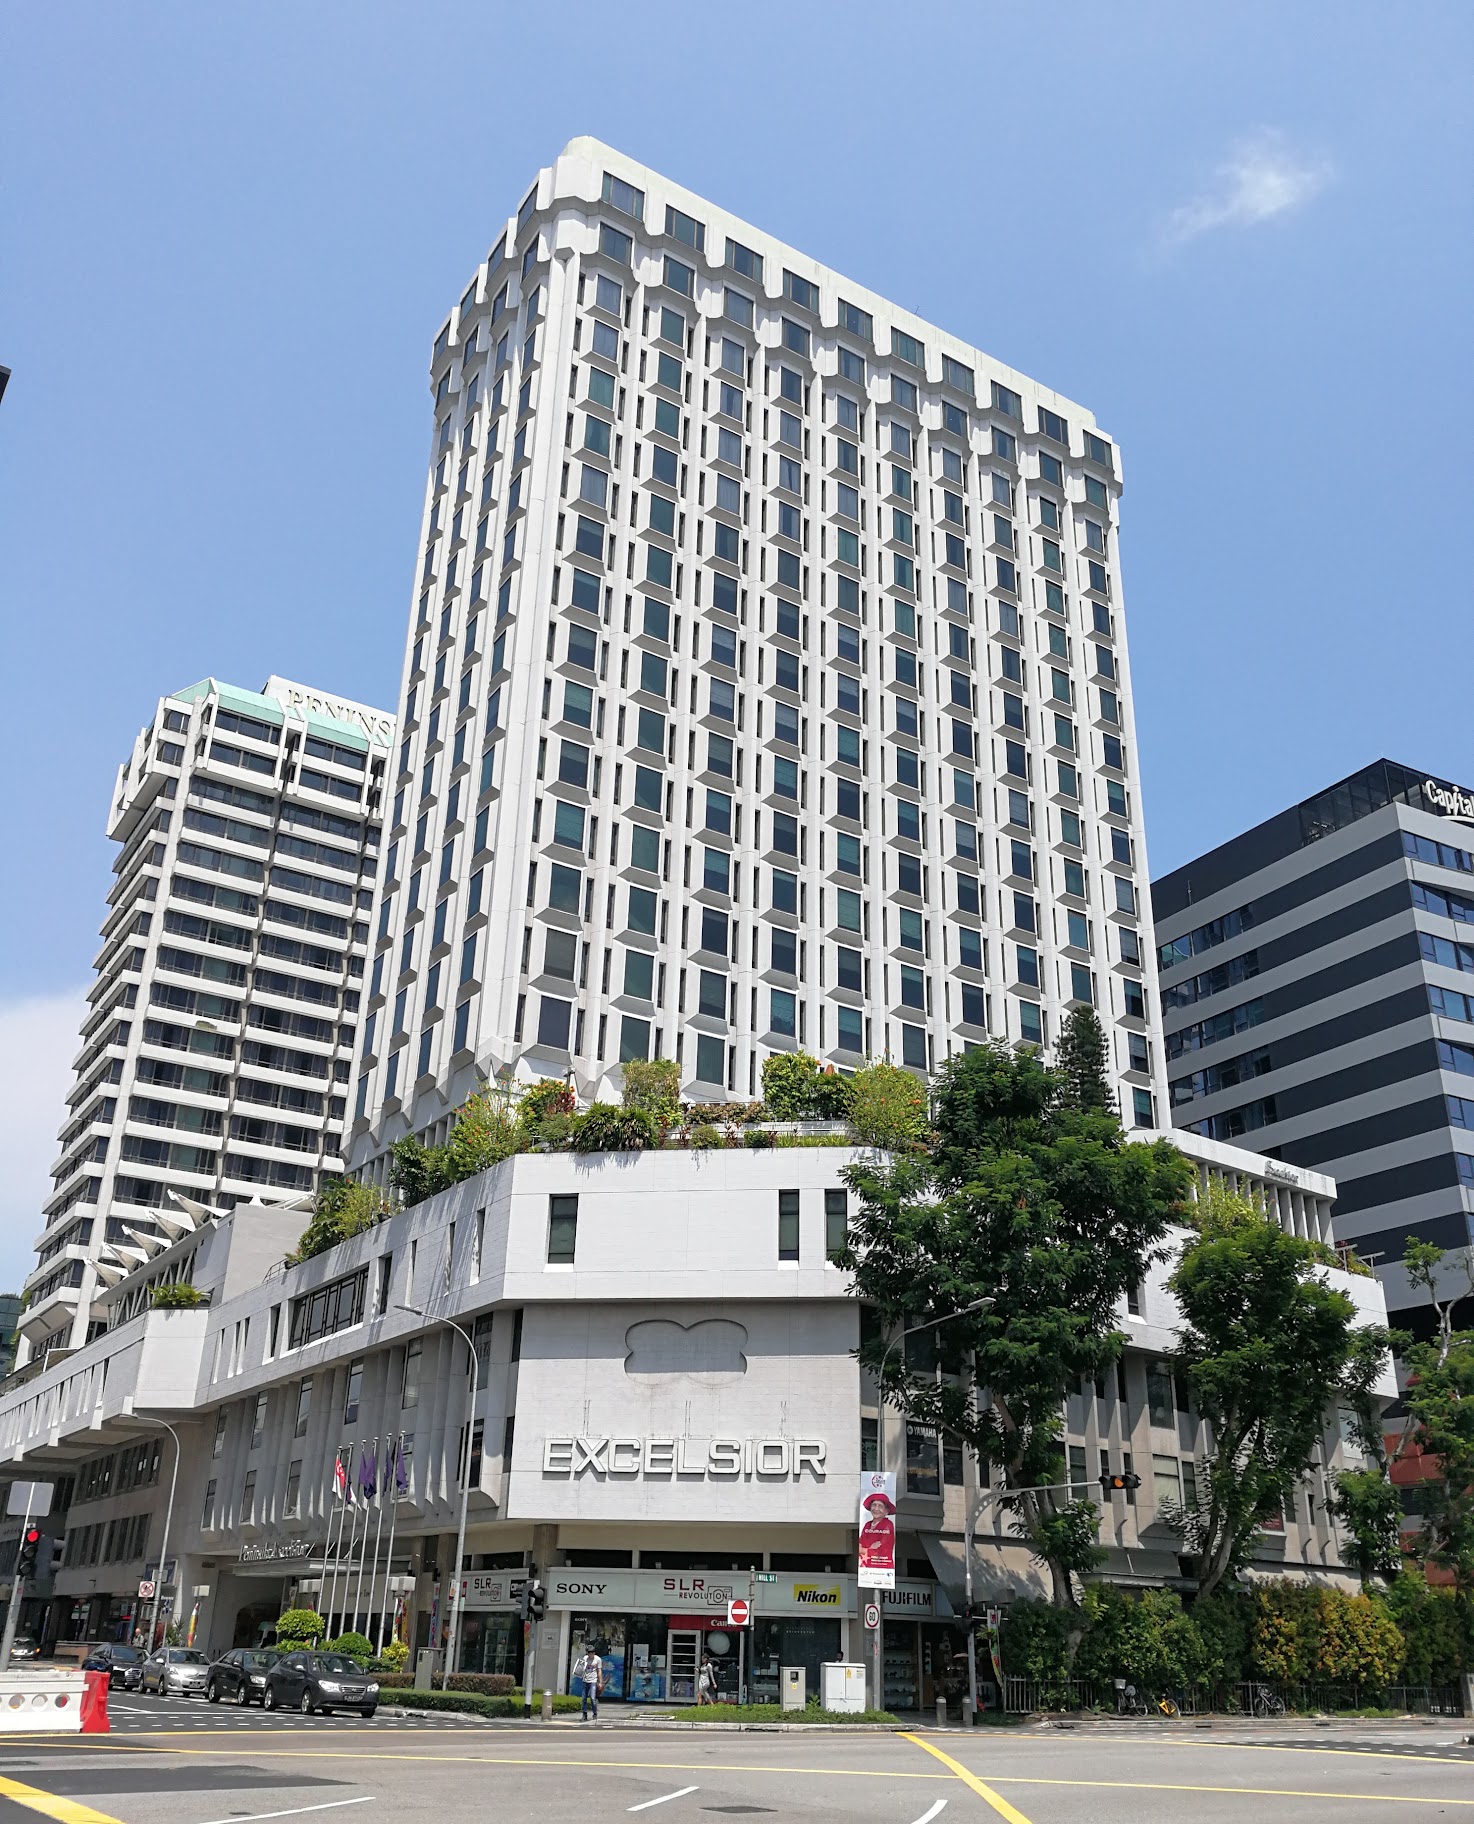 Peninsula Excelsior Tower Hotel